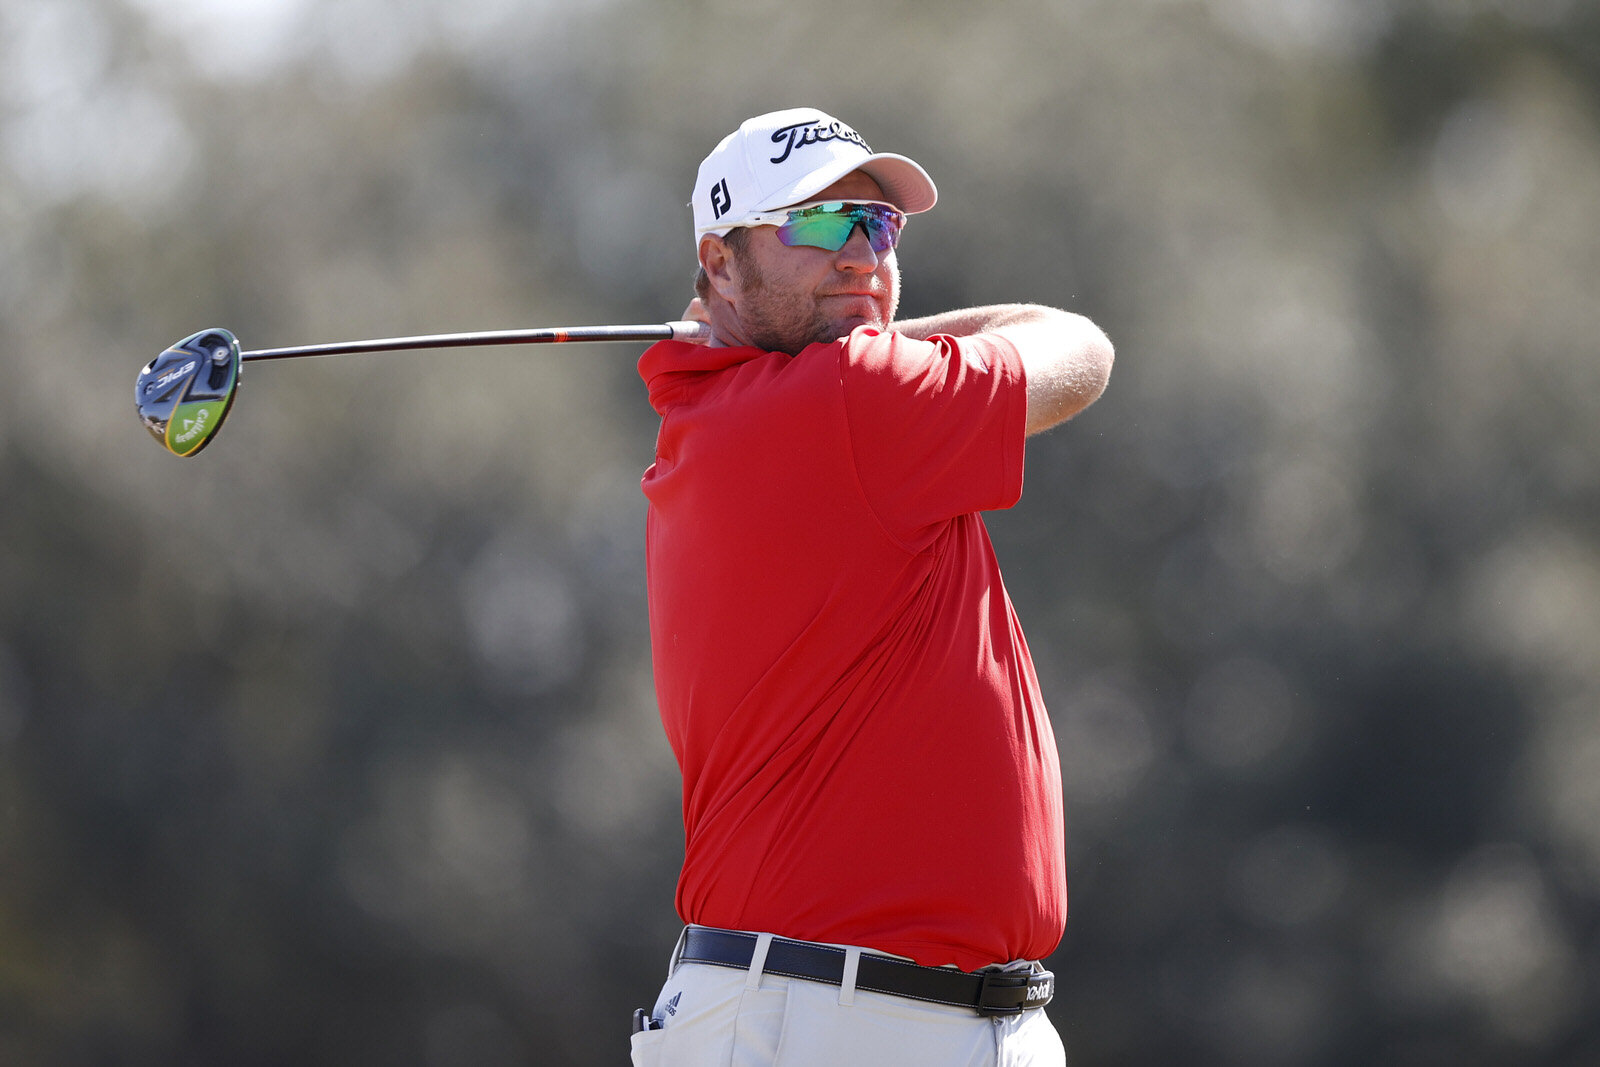  HOUSTON, TEXAS - NOVEMBER 07: Dawie van der Walt of South Africa plays his shot from the 10th tee during the third round of the Houston Open at Memorial Park Golf Course on November 07, 2020 in Houston, Texas. (Photo by Carmen Mandato/Getty Images) 